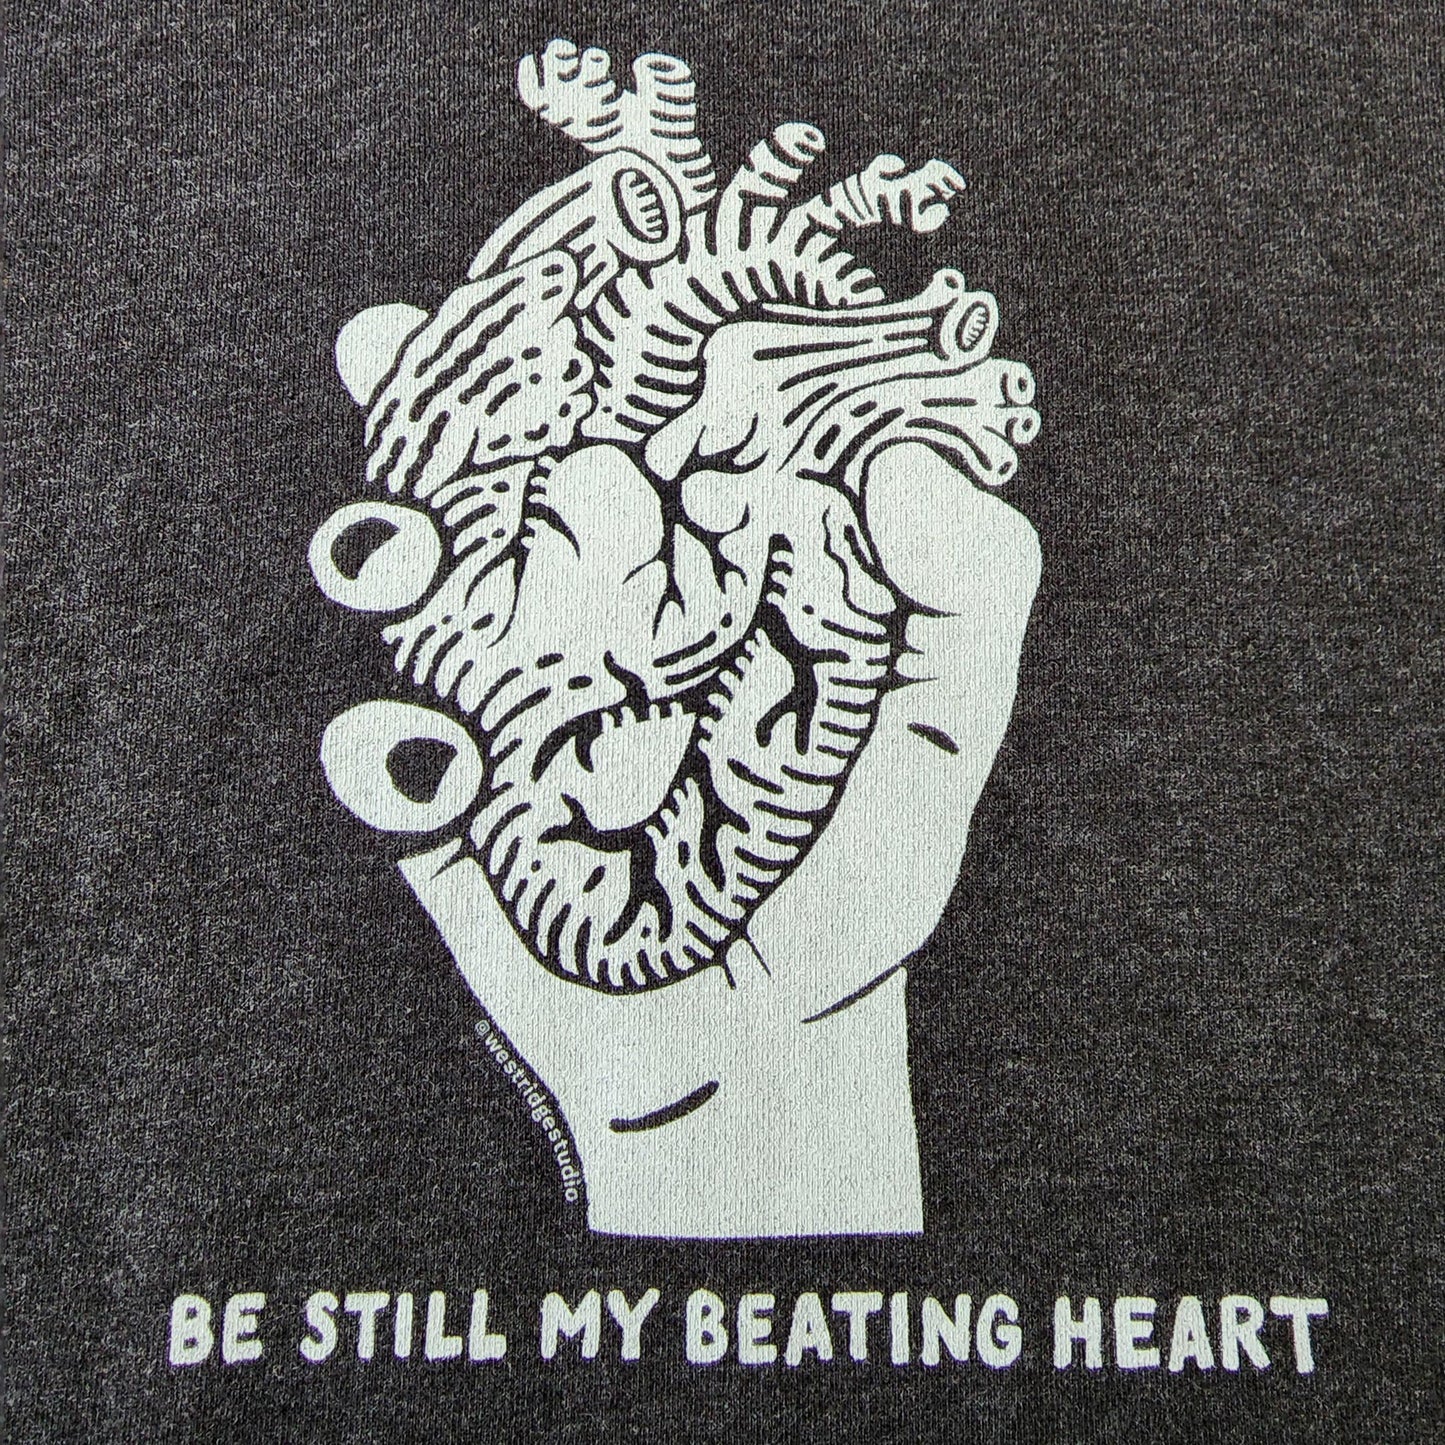 Be Still My Beating Heart graphic black men's pullover hoodie - detail of heart graphic